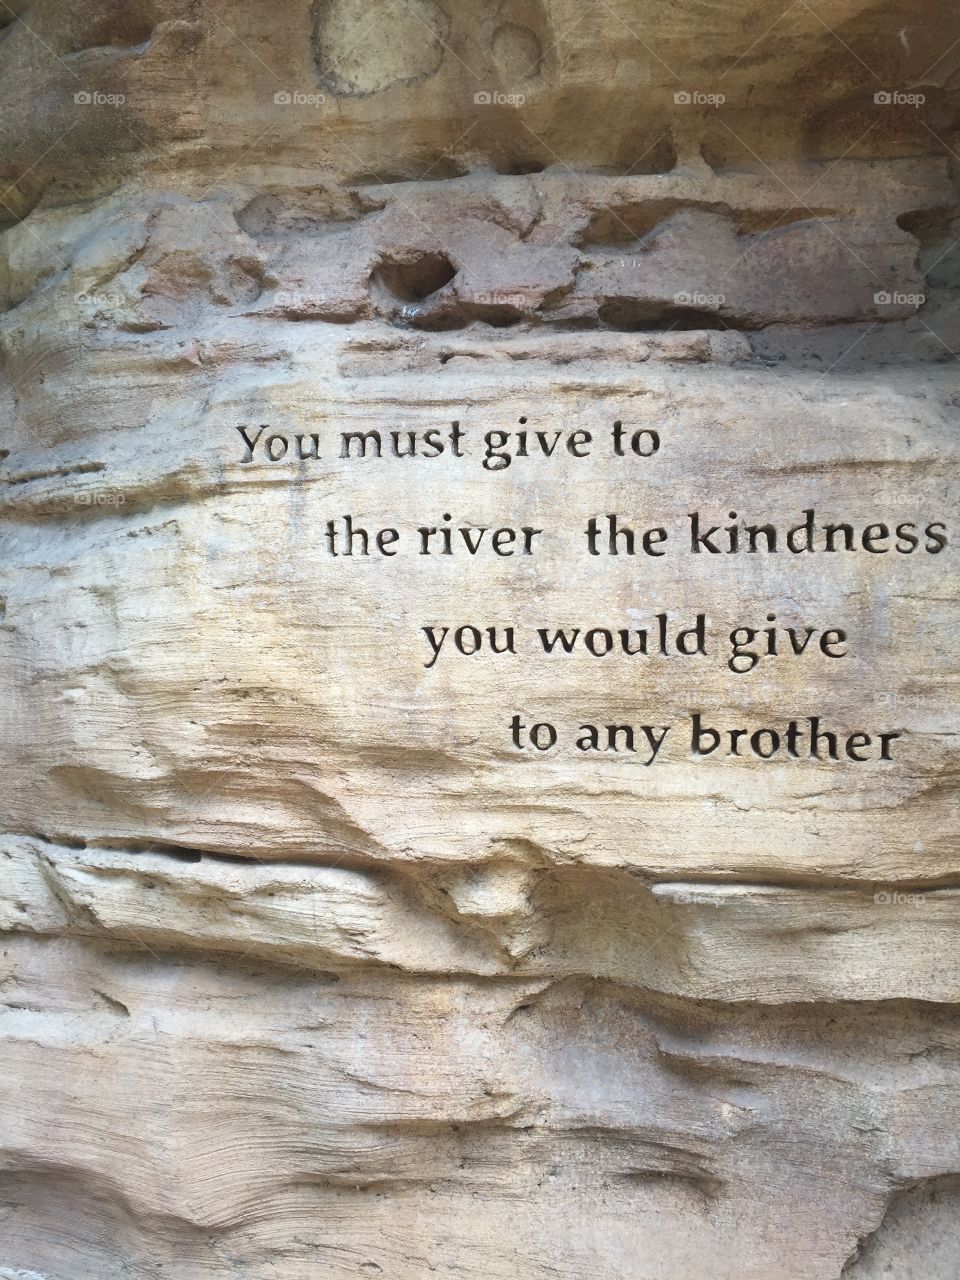 "You must give to the river the kindness you would give to any brother."